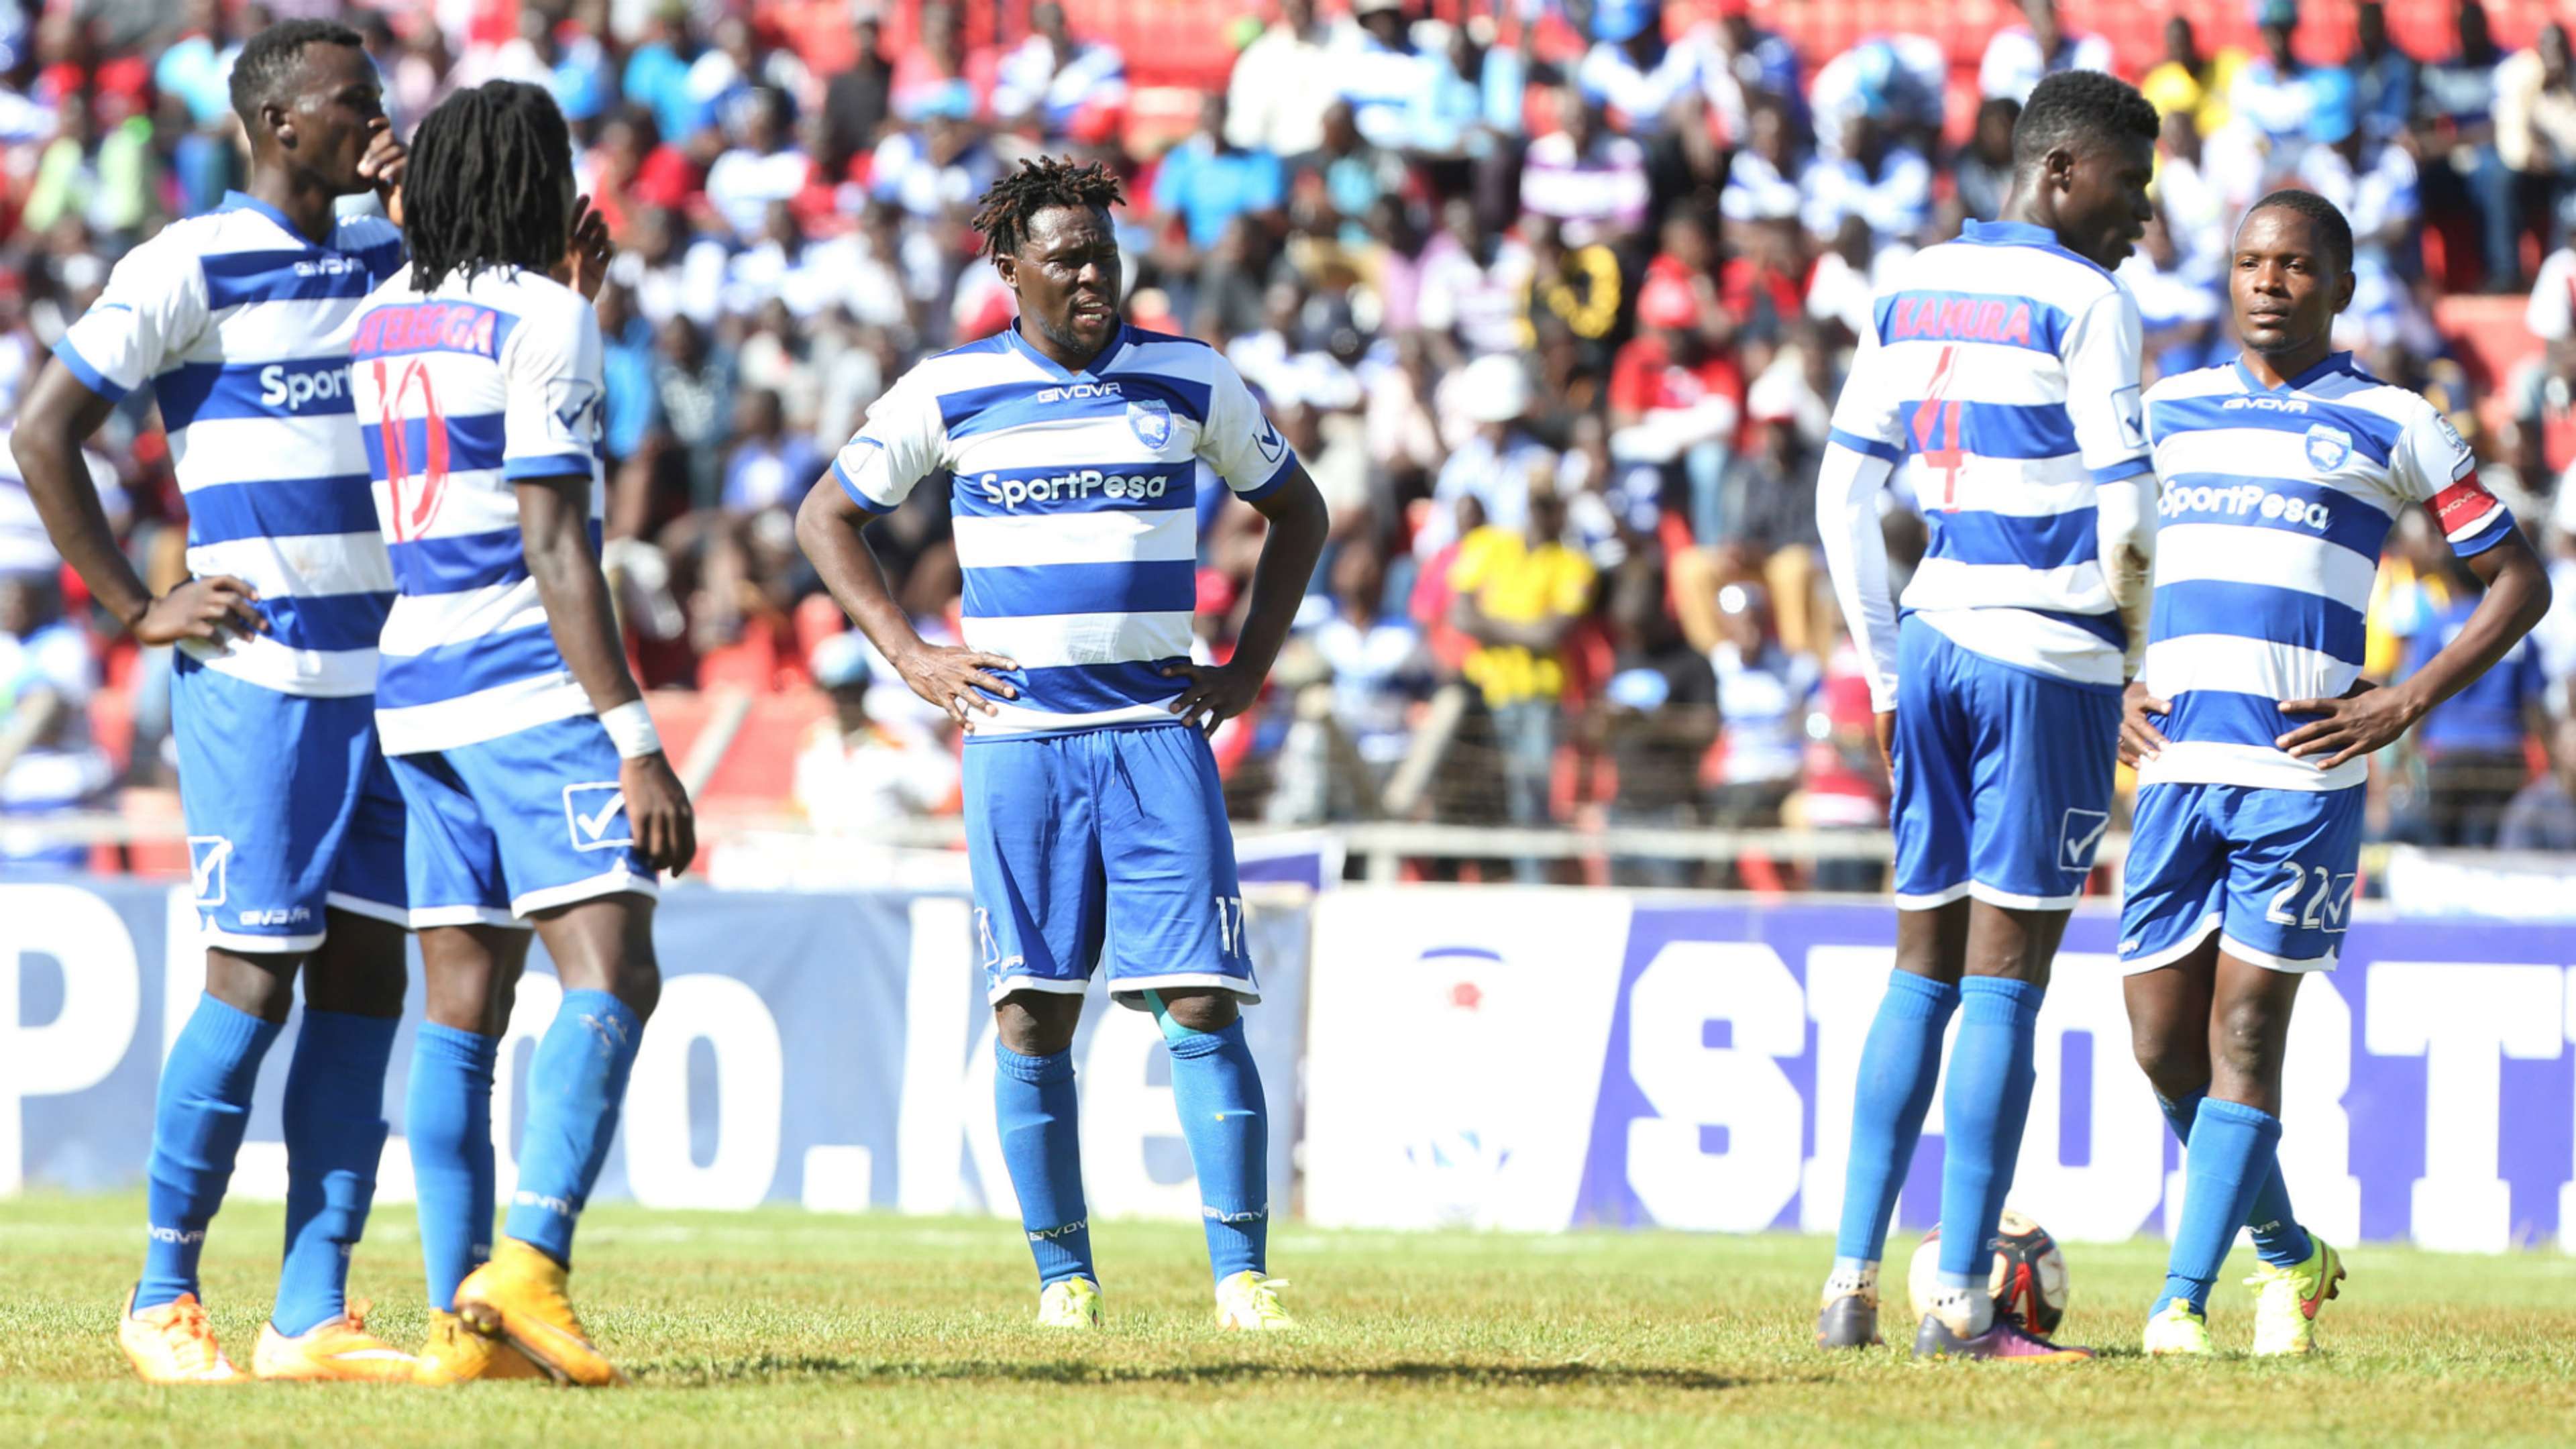 AFC Leopards players look dejected after conceding against Gor Mahia